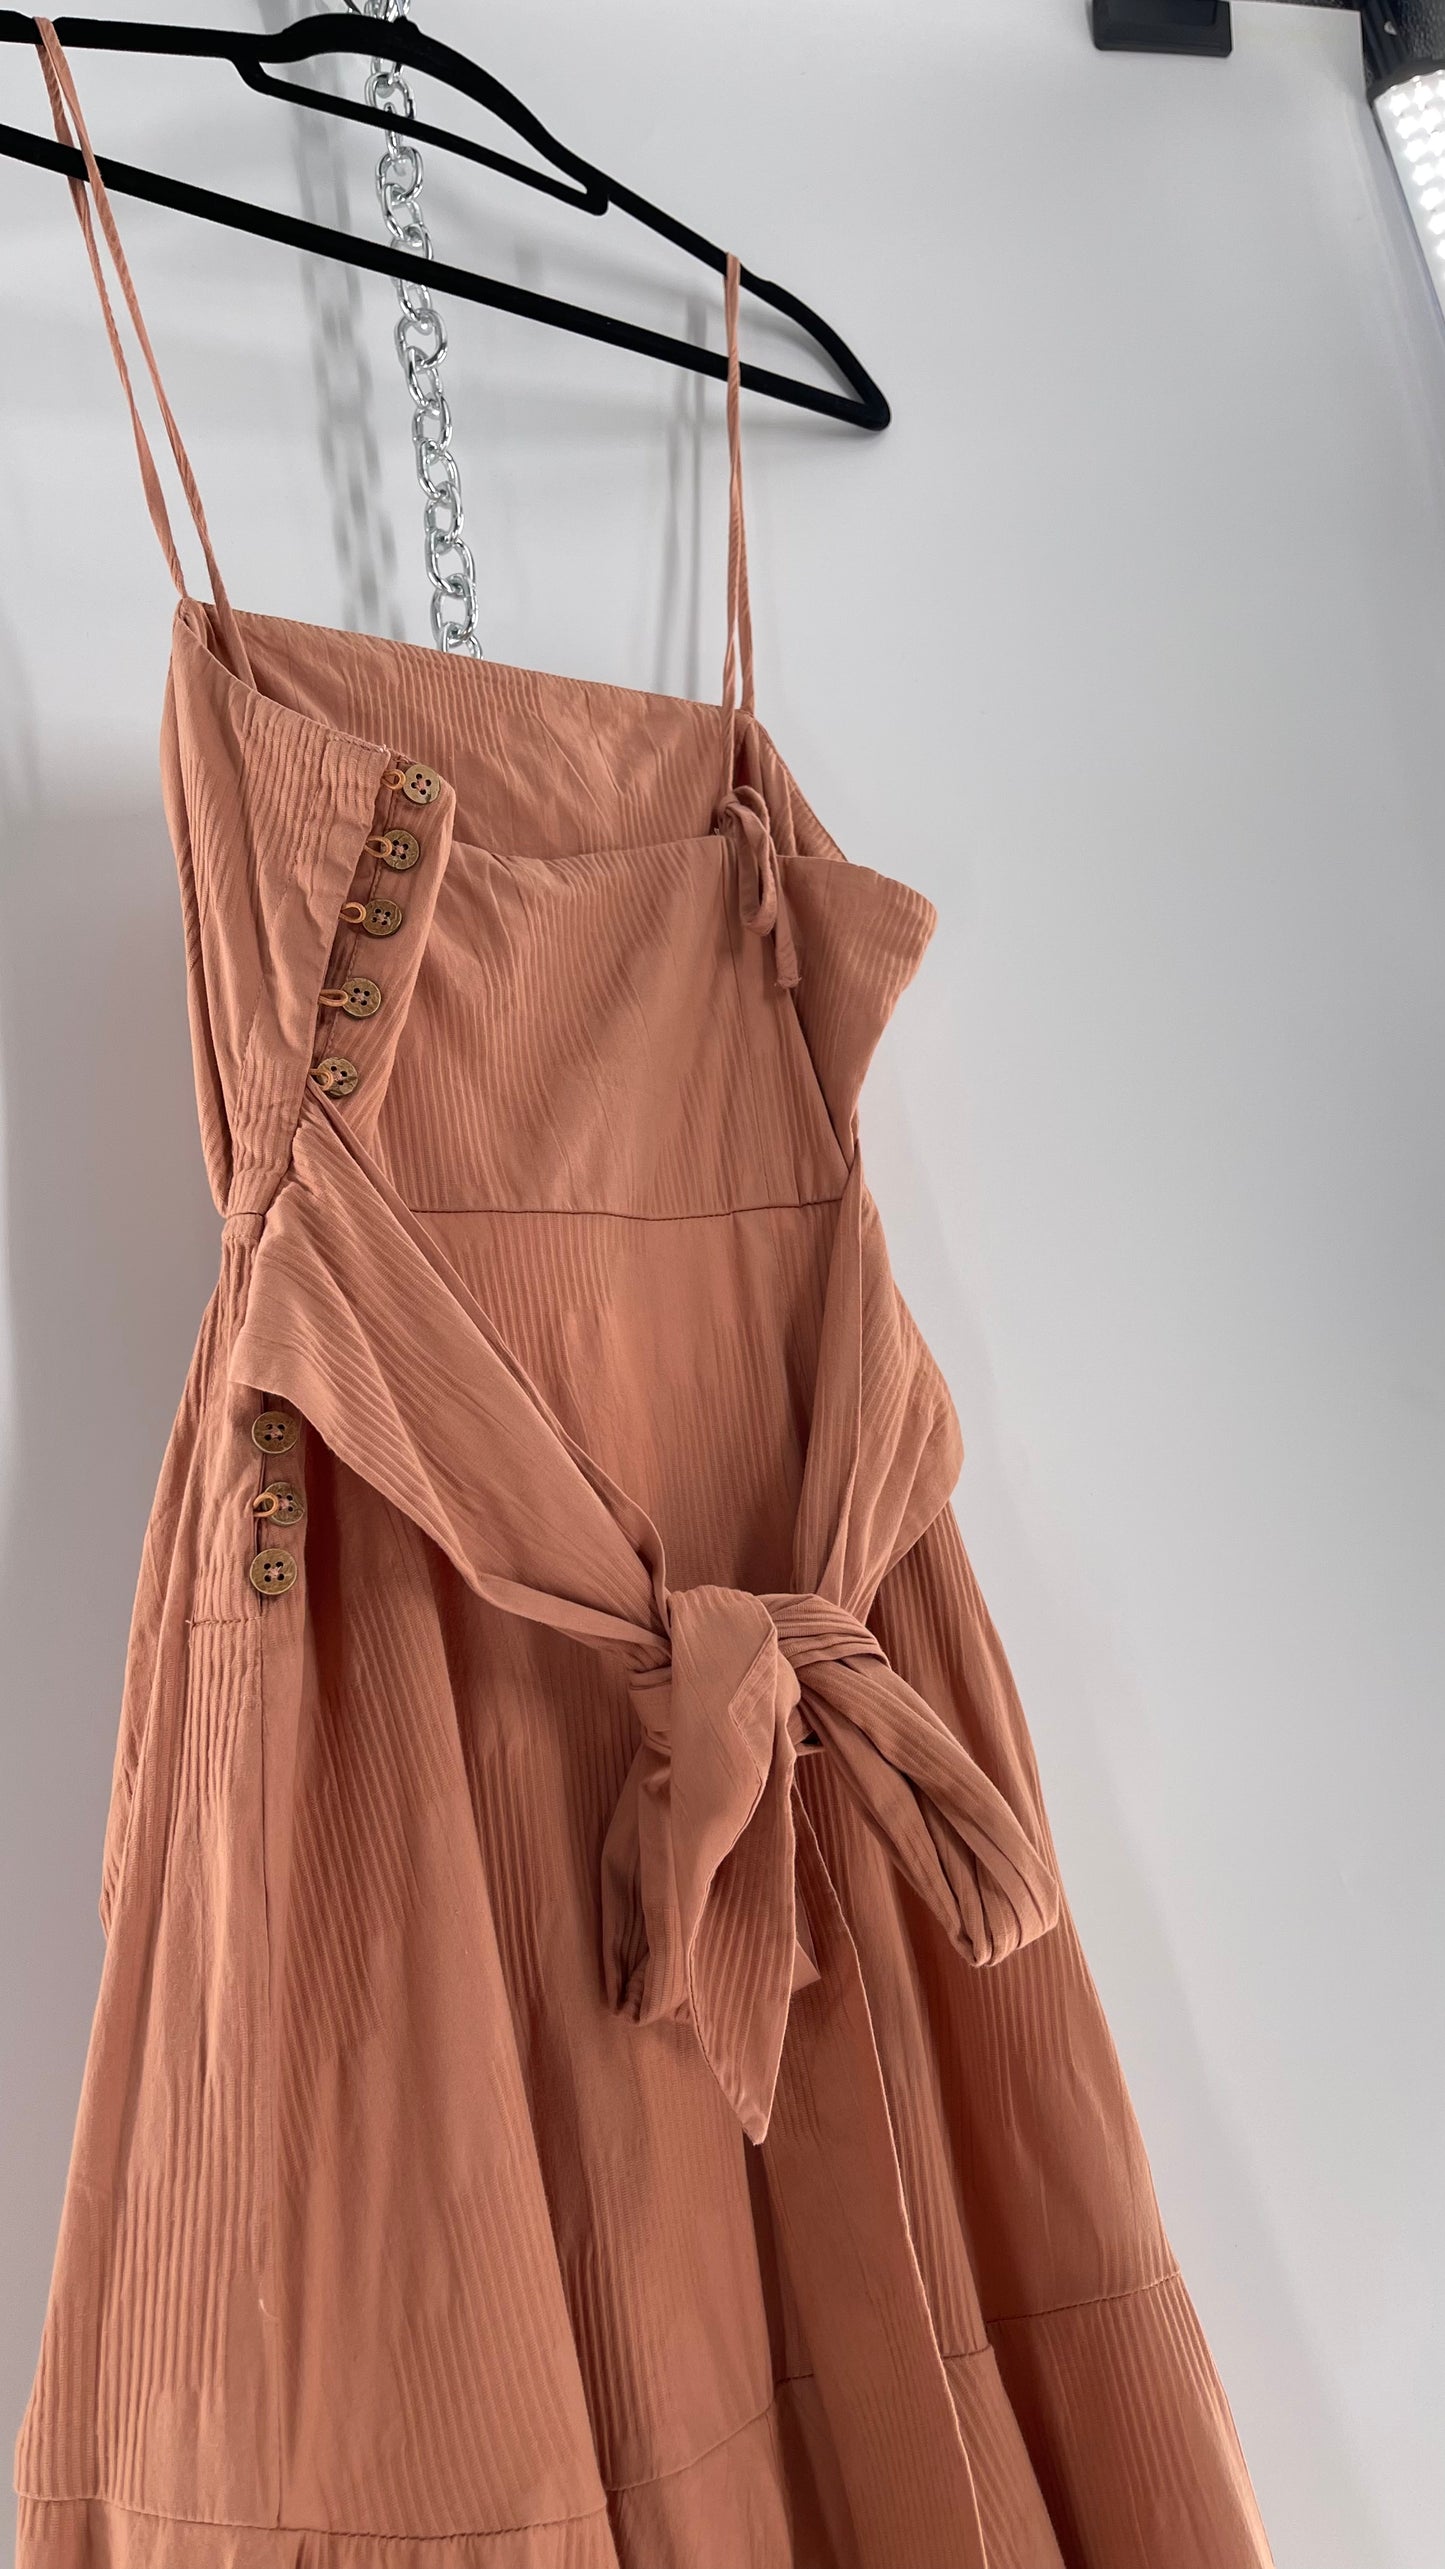 Free People Terracotta/ Smoky Pink Maxi Dress with Exposed Midriff, Waist Bow, and Side Slit with Tags Attached  (M)